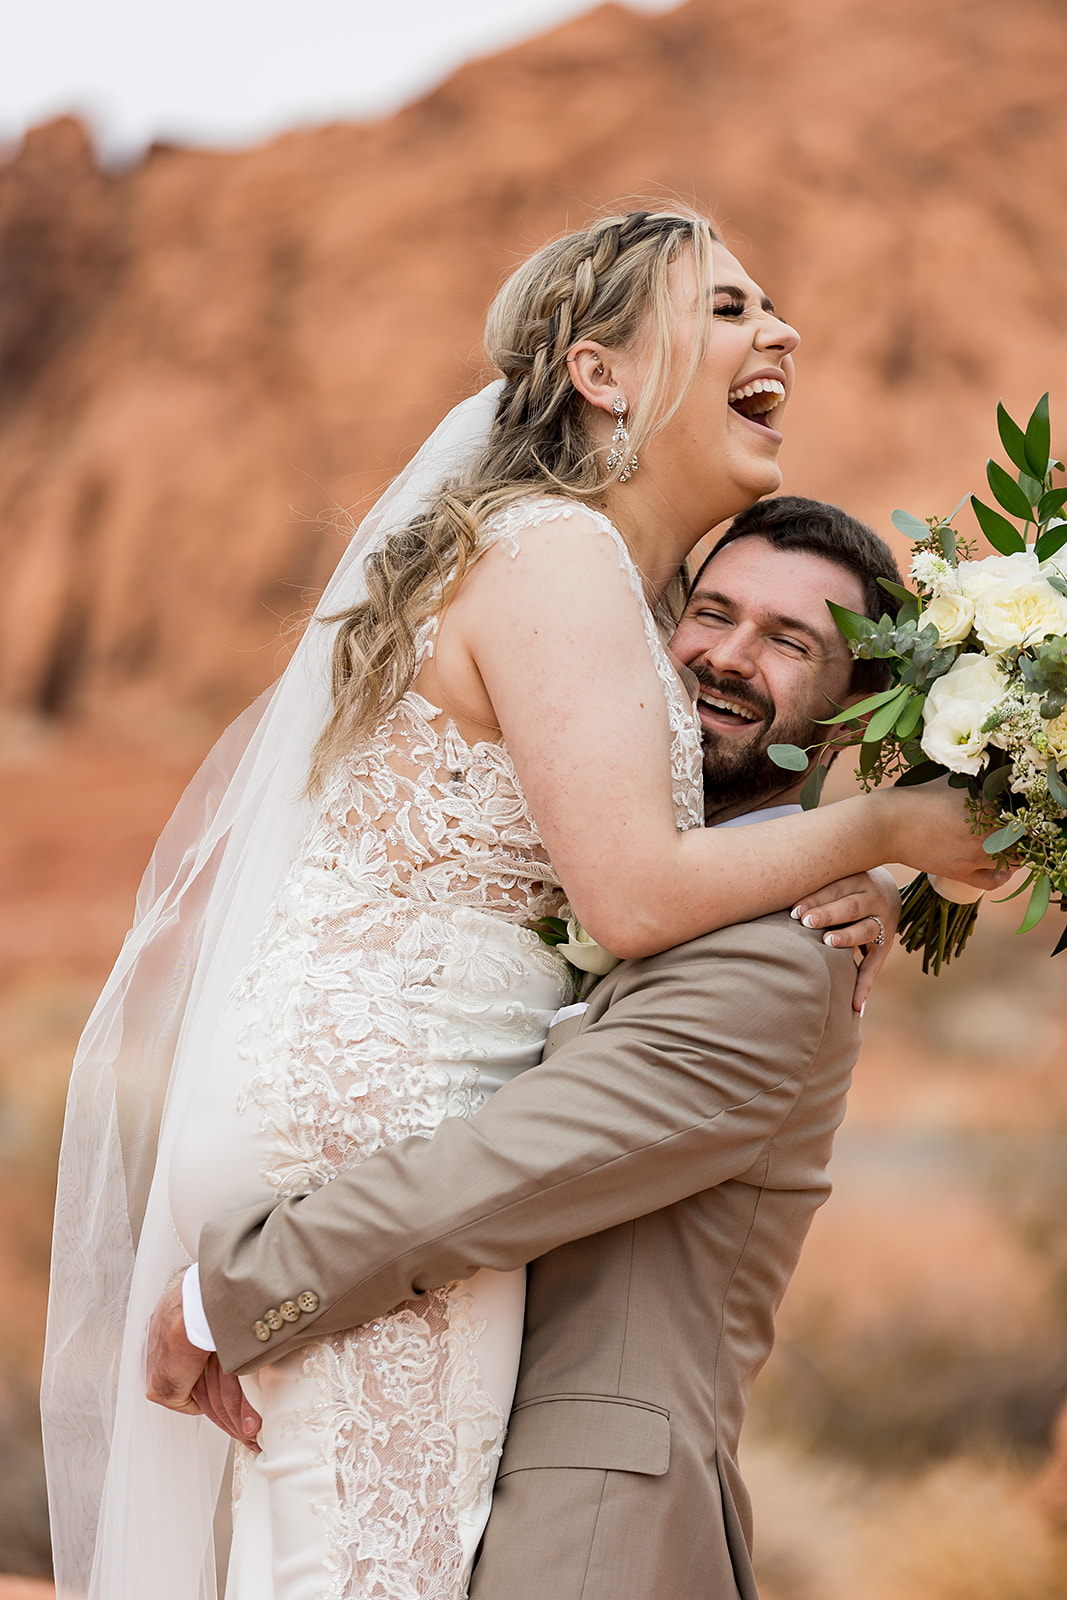 Valley of Fire Wedding & Elopement Planning Guide. Groom lifting up bride as they both smile.